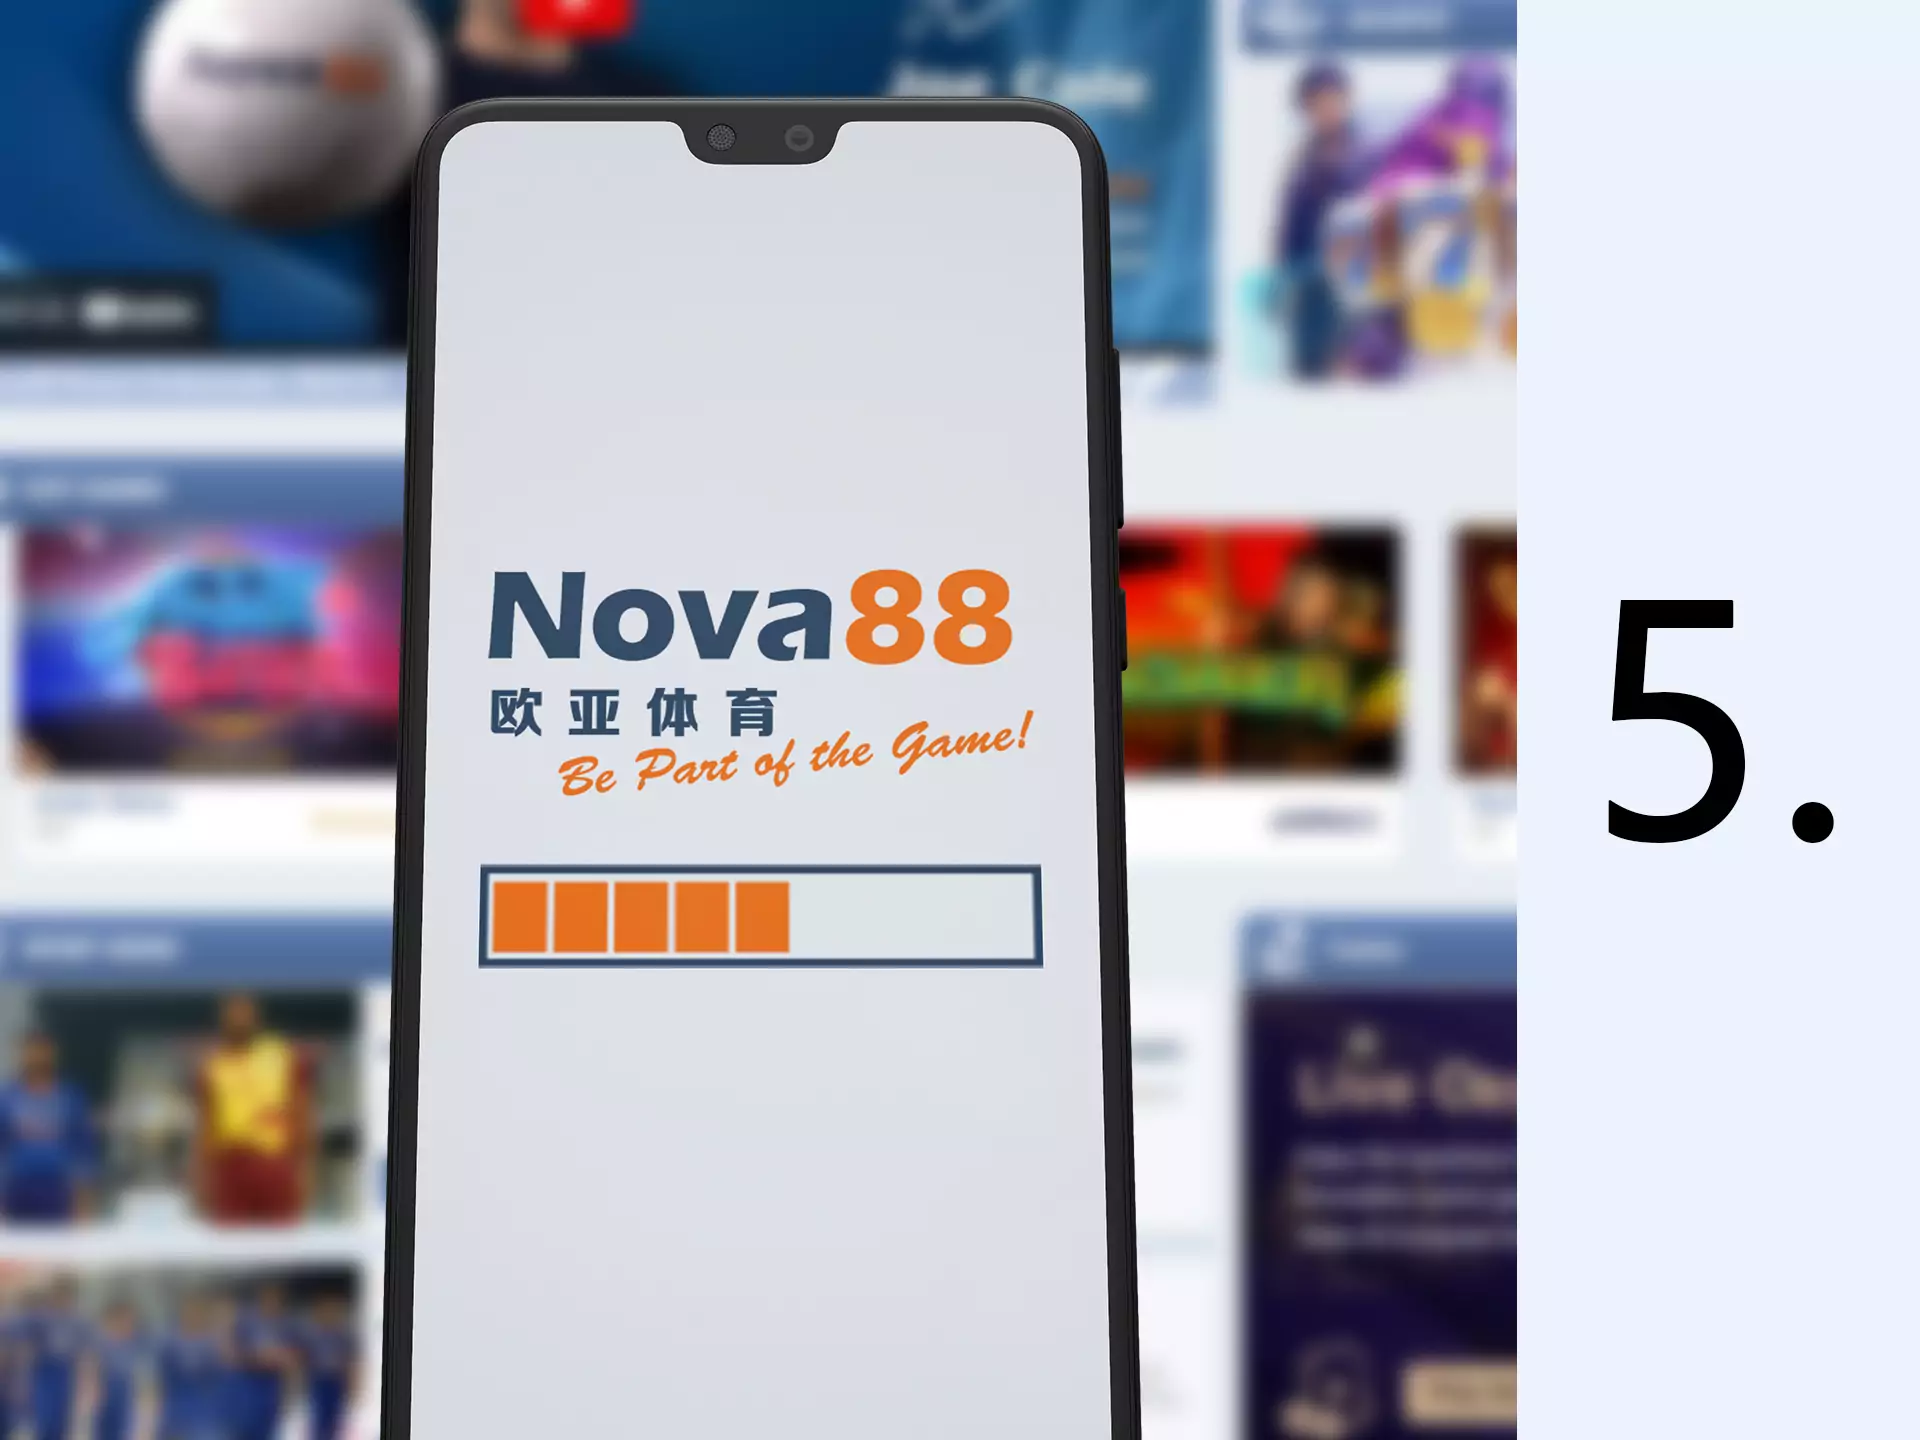 Install Nova88 app and bet with comfort.